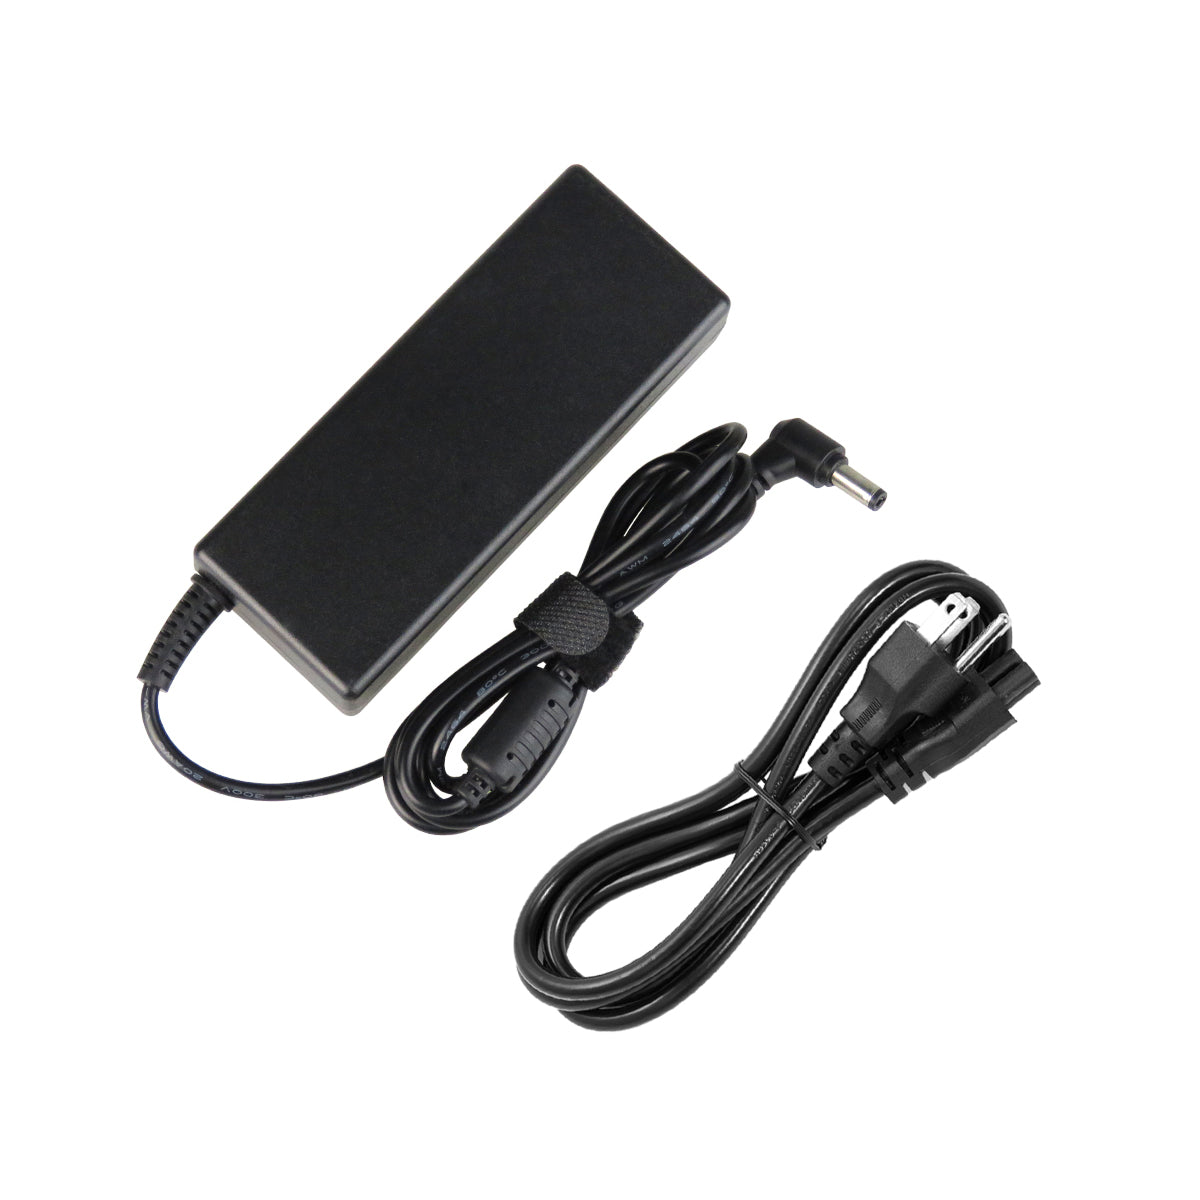 AC Adapter Charger for ASUS U56E Notebook.